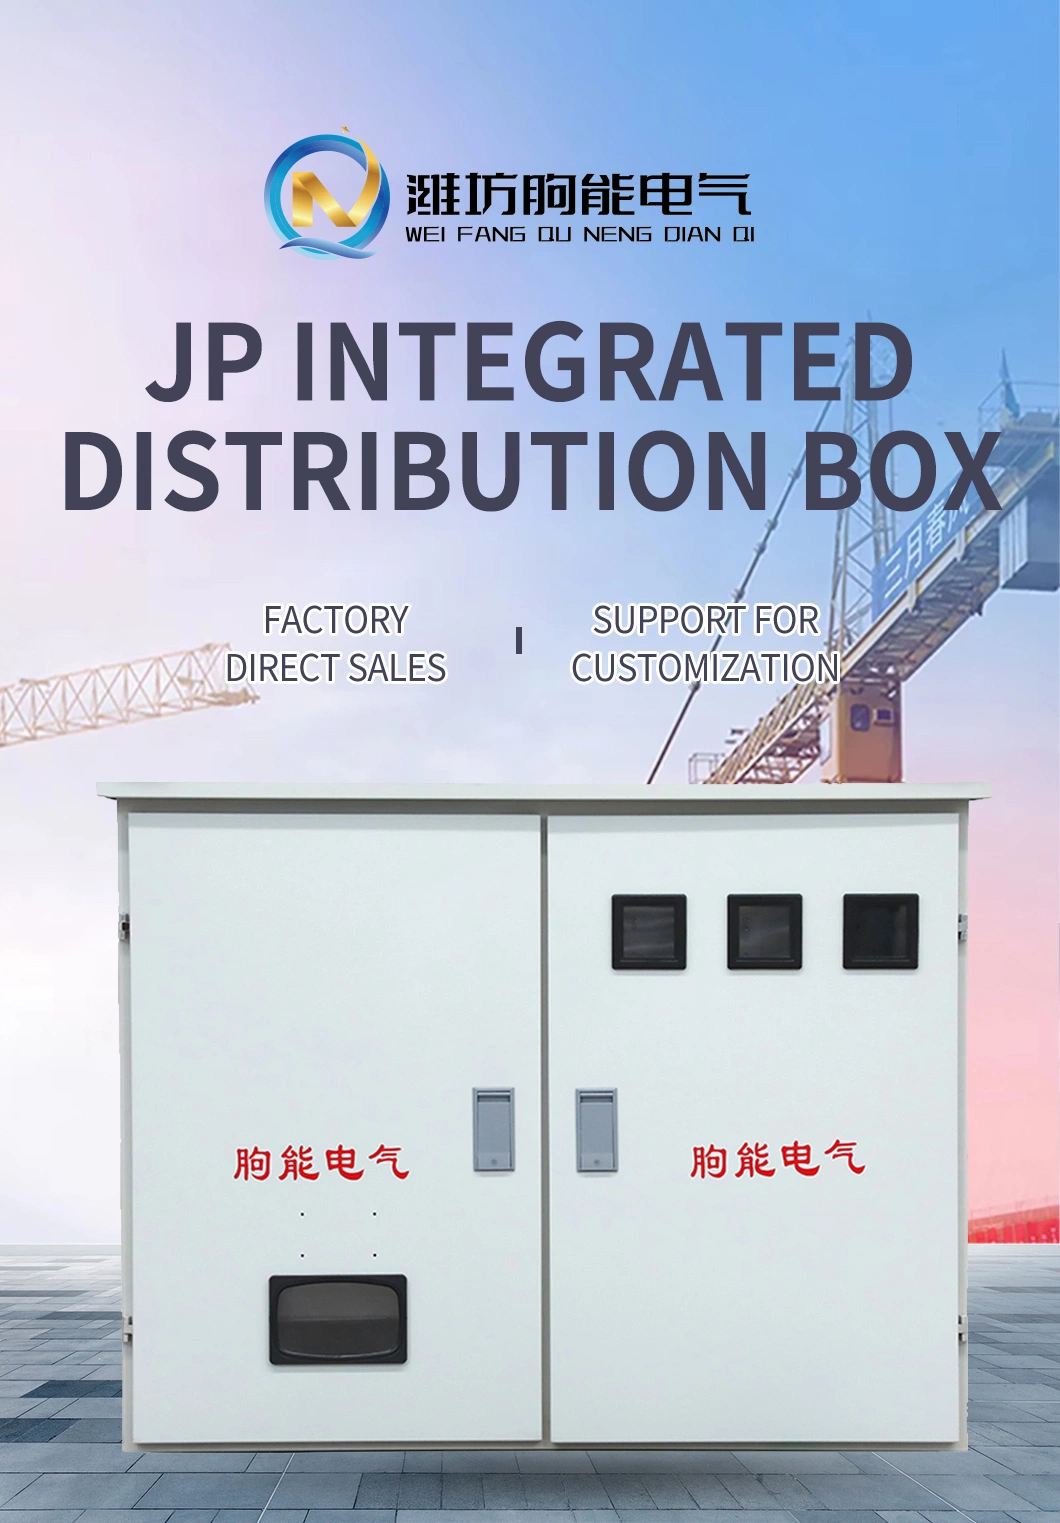 Low Voltage Stainless Steel Metal Electrical Power Distribution Transformer Substation Control Box